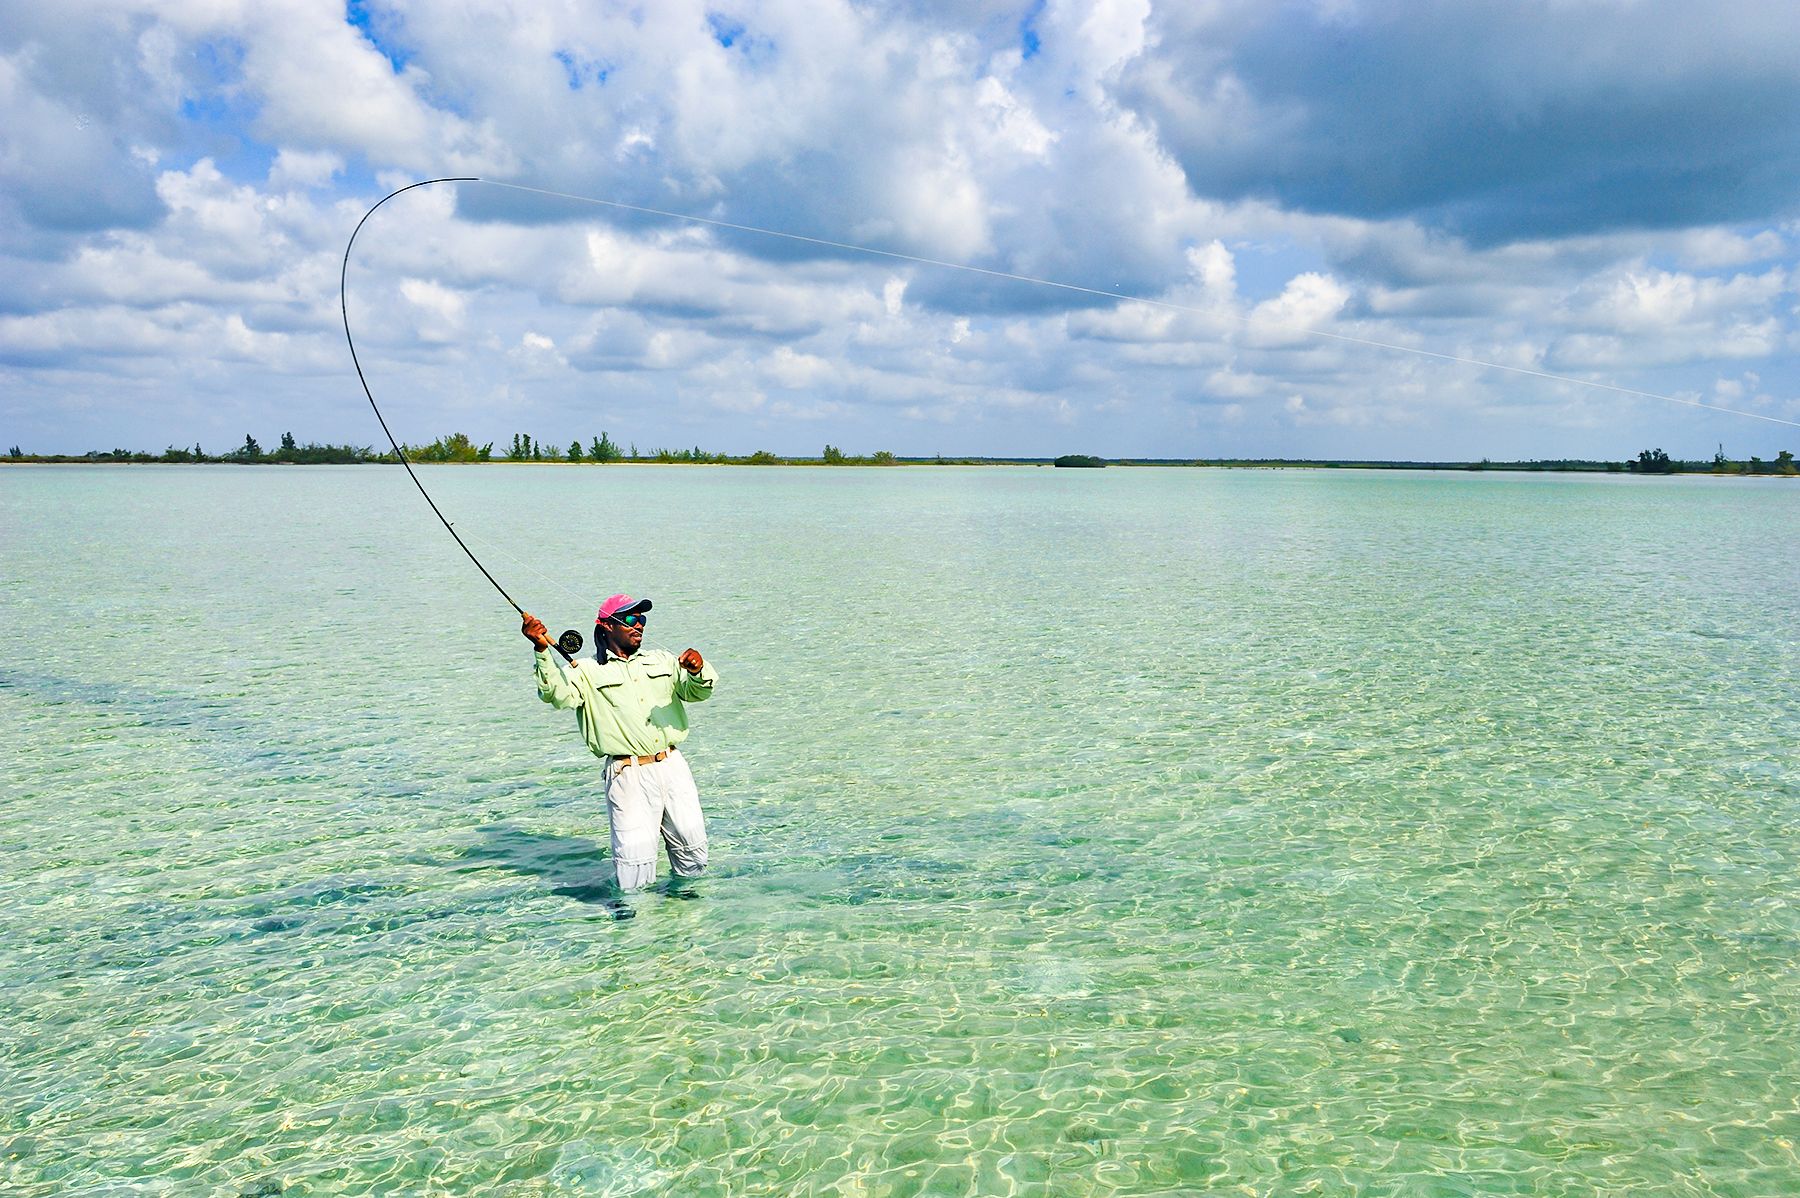 GRAND CAYMAN FLY FISHING: THE HAVEN